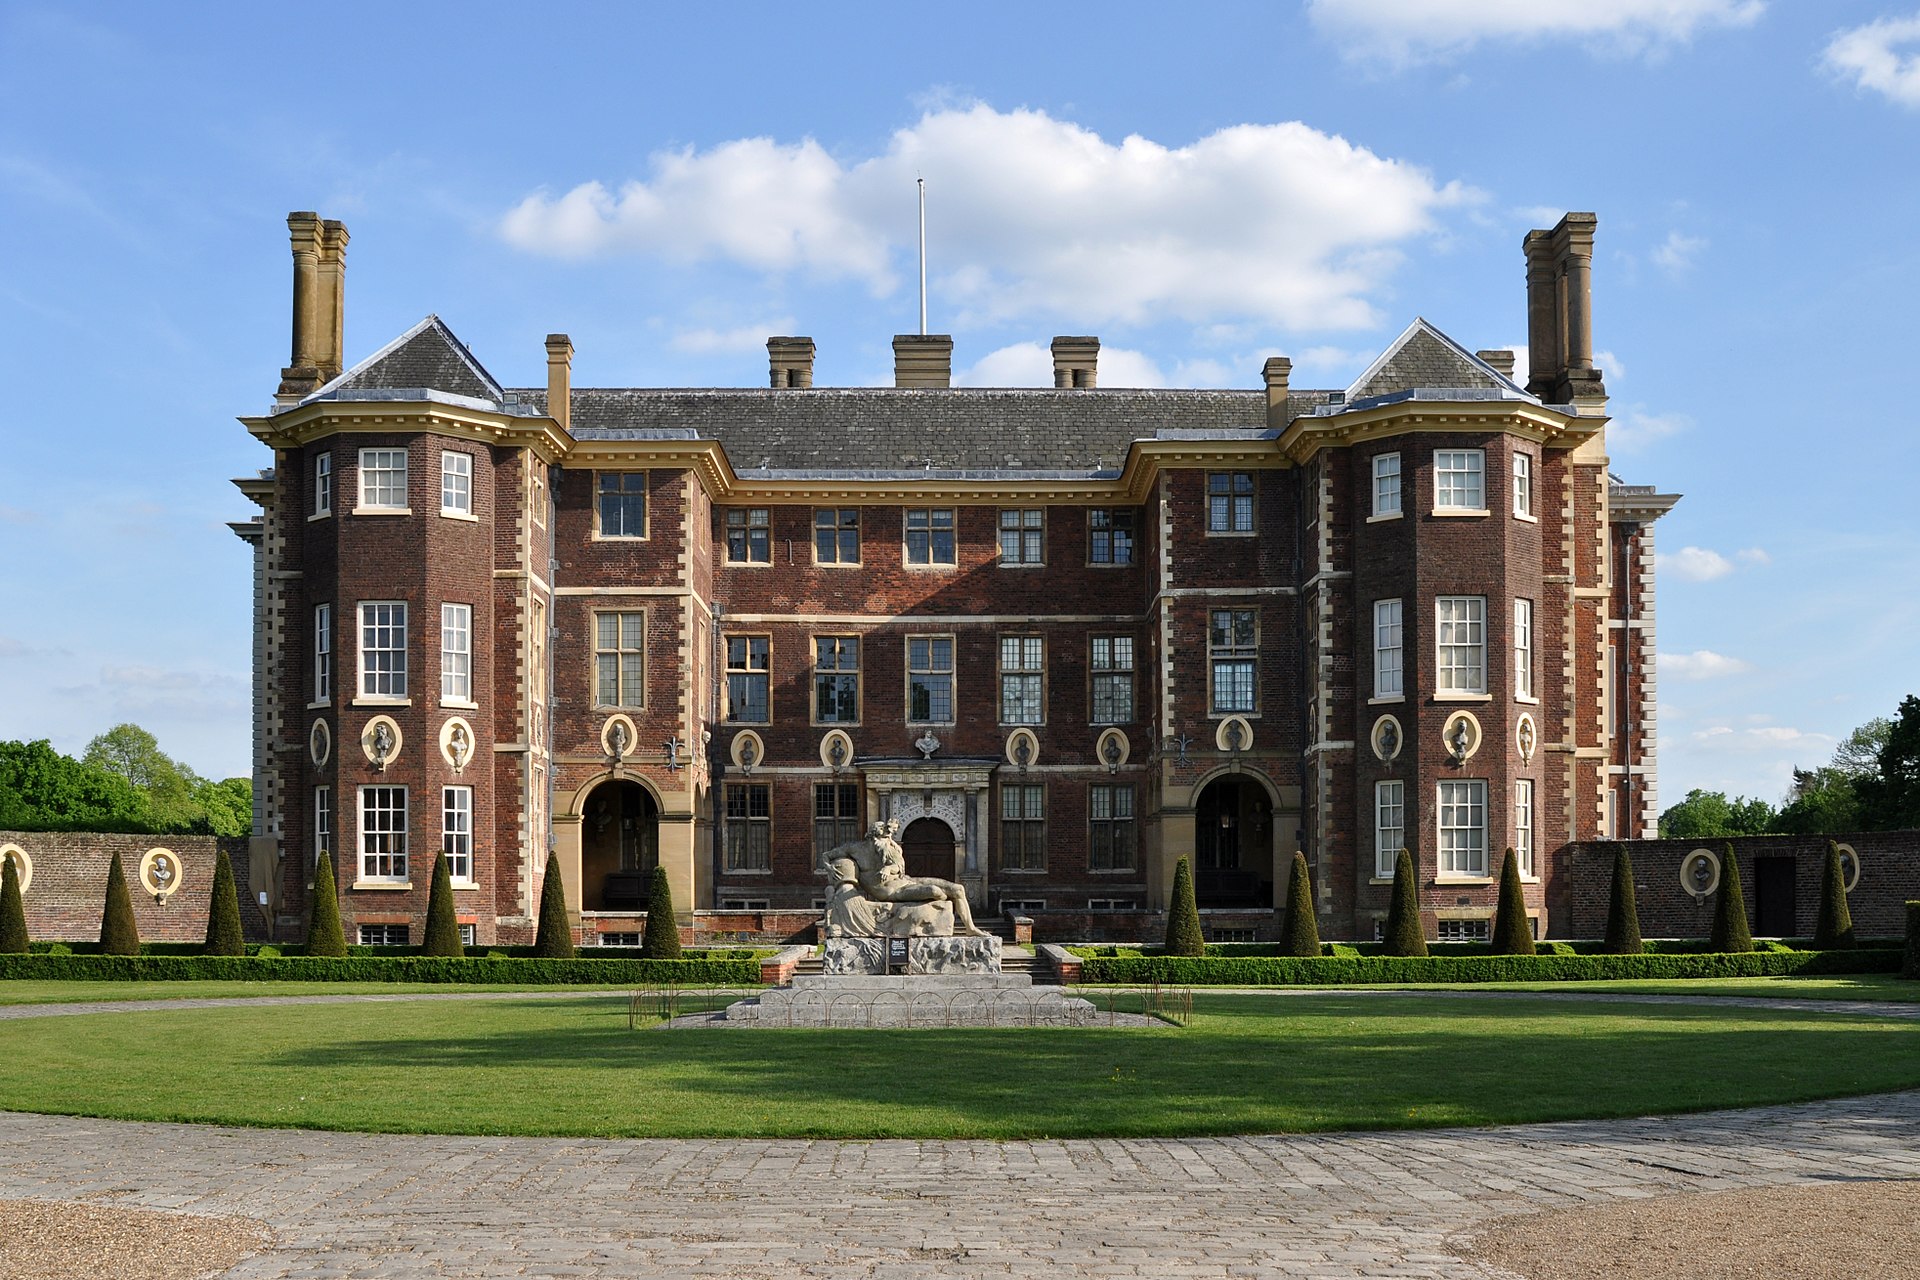 Ham House, Richmond. One-time seat of the Earls of Dysart, donated to the National Trust in 1948 by Sir Lyonel Tollemache. Credit: By Stevekeiretsu - Own work, CC BY-SA 4.0, https://commons.wikimedia.org/w/index.php?curid=62362841